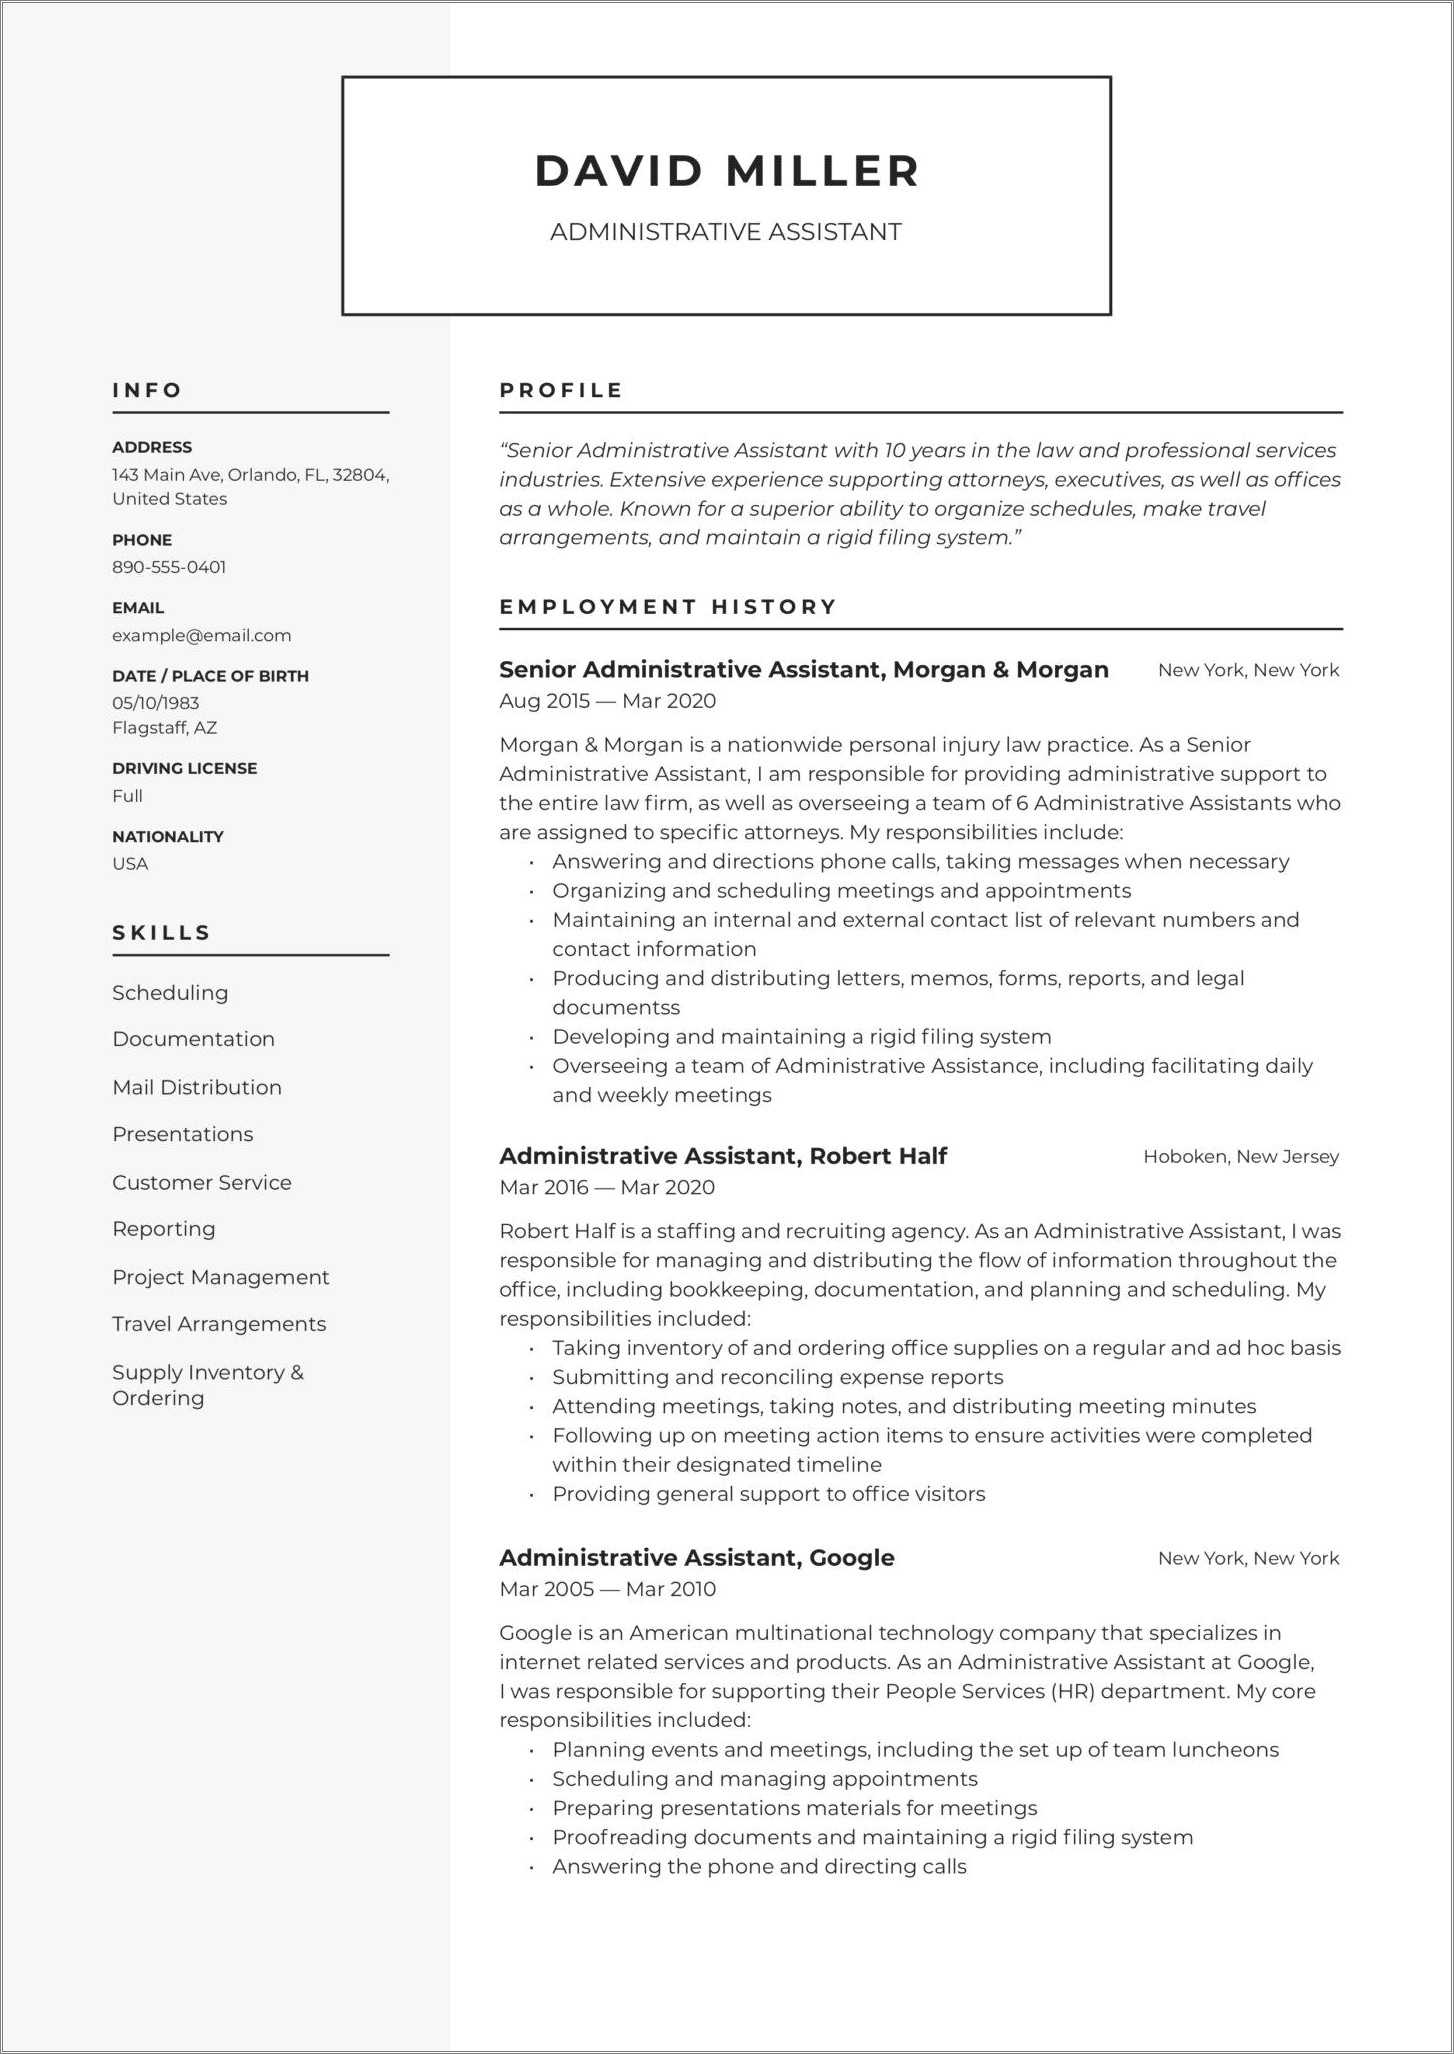 resume skills and abilities nursing assistant